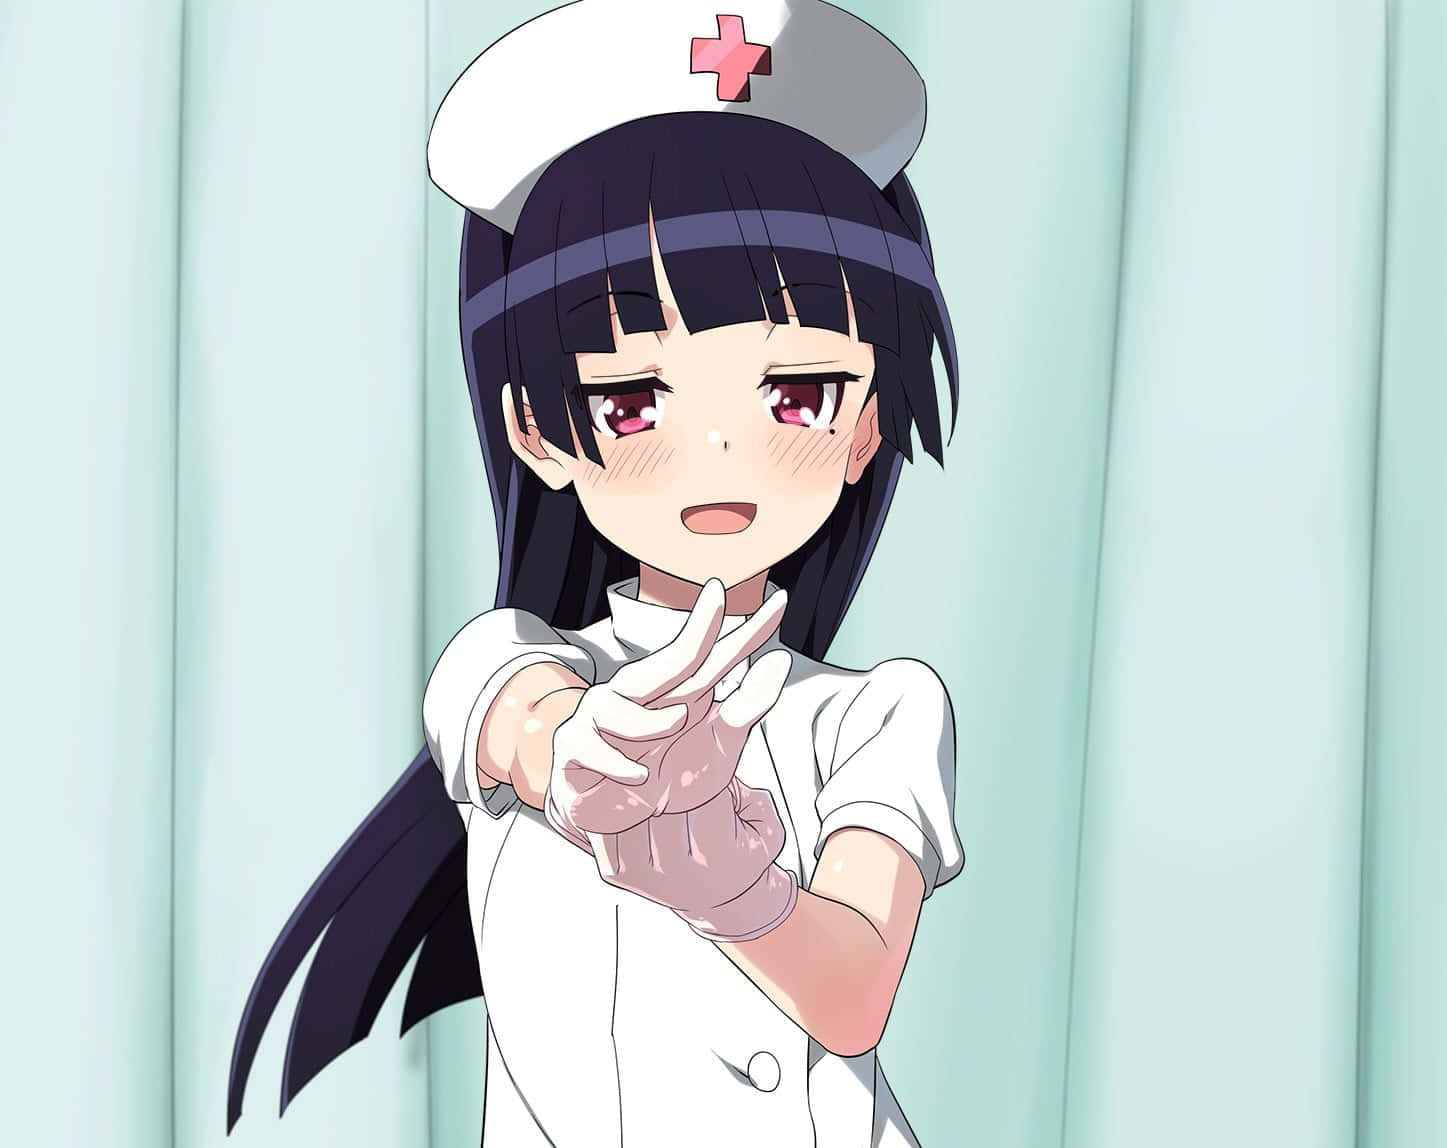 A Nurse In A White Uniform Pointing At Something